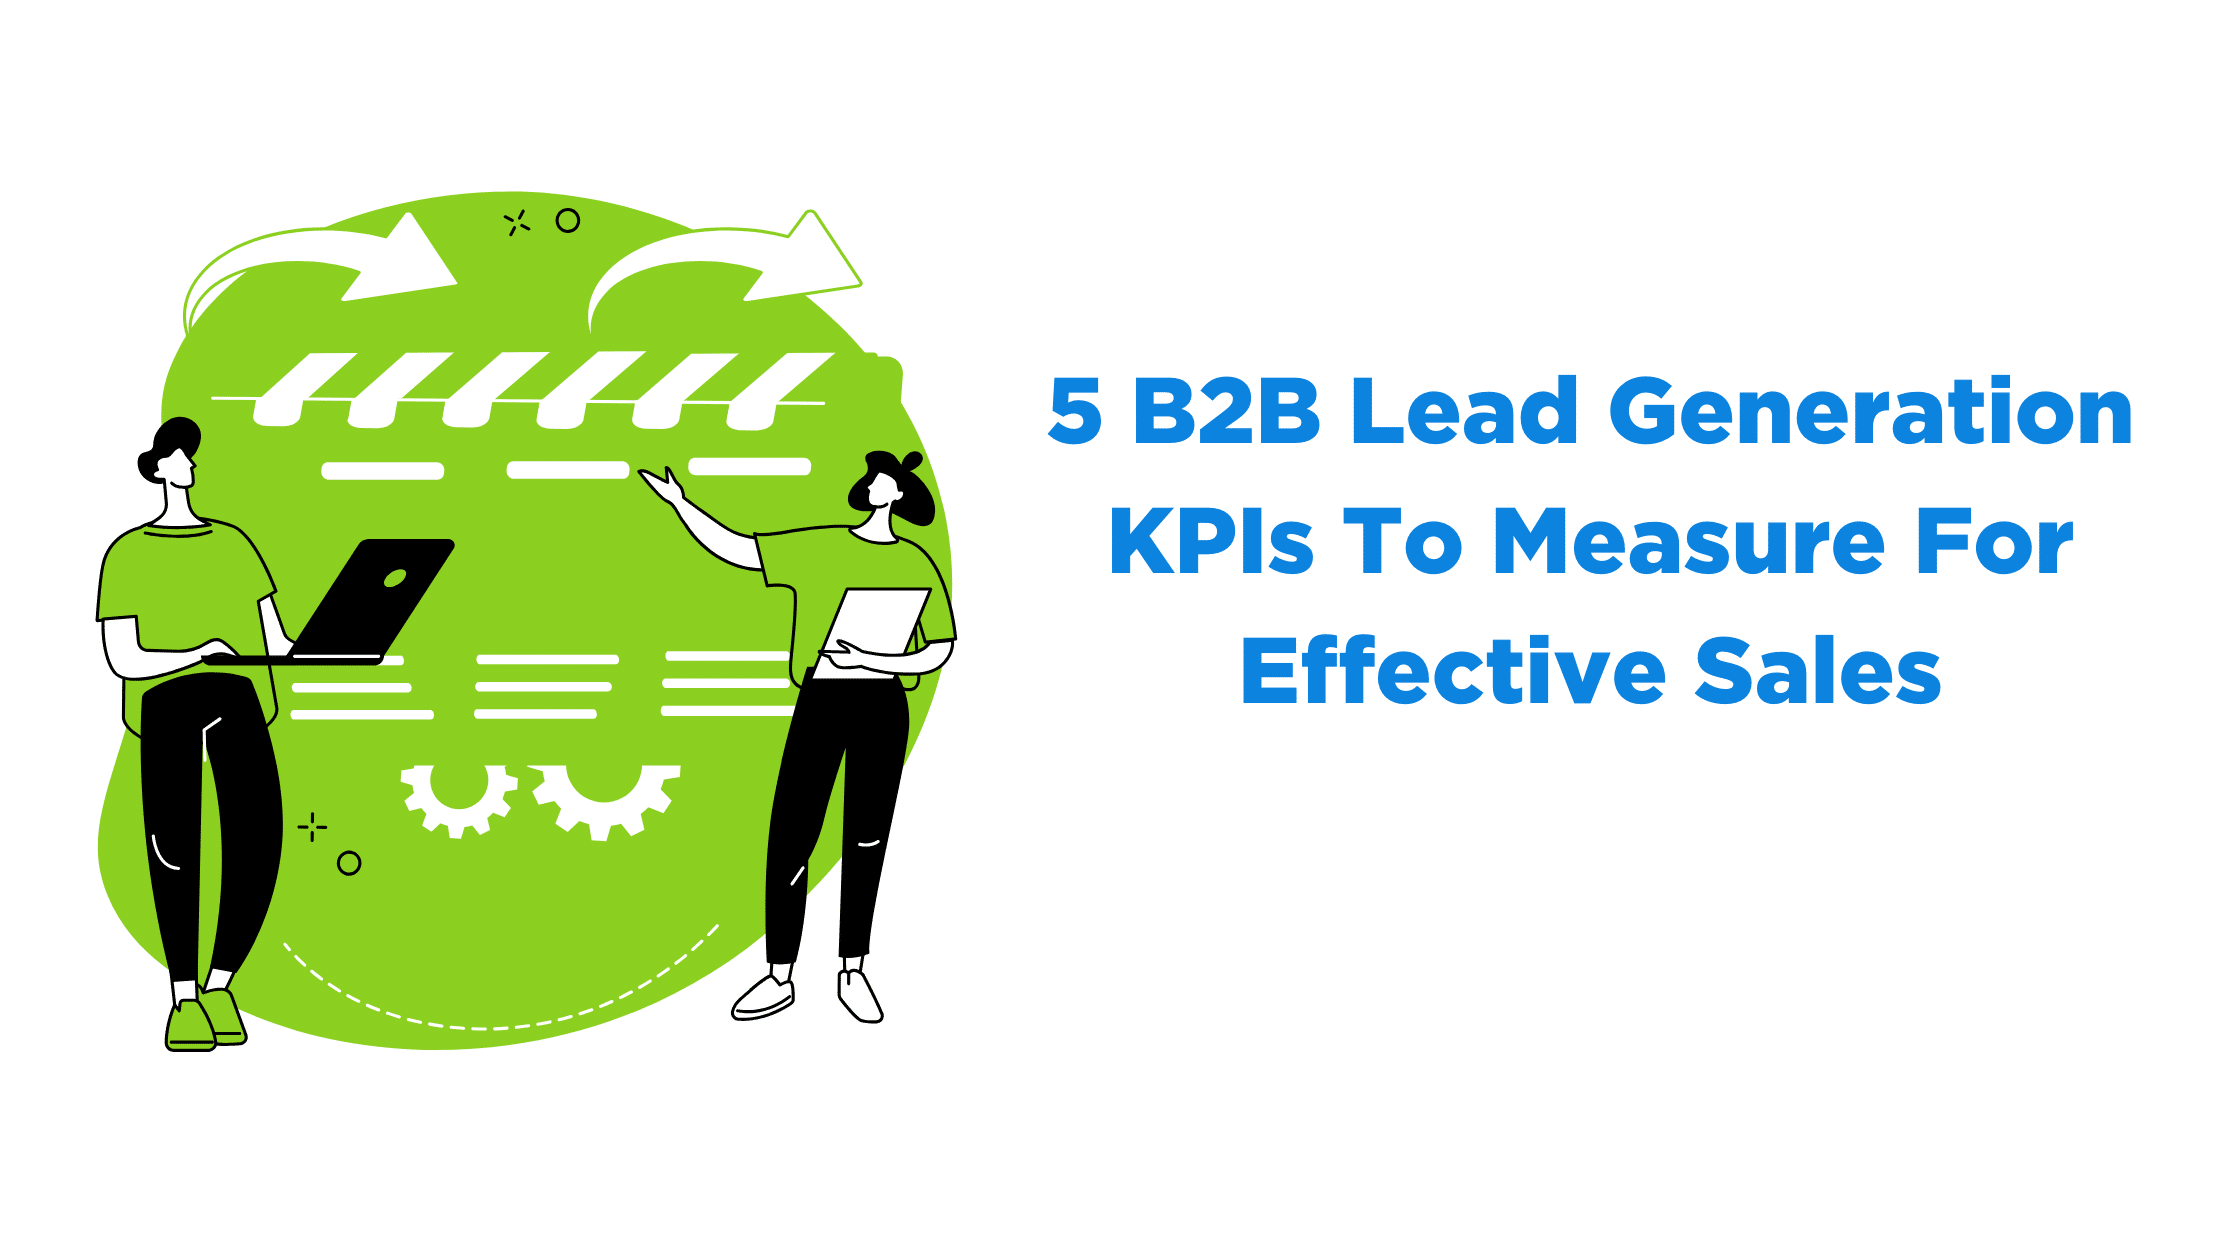 5 B2B Lead Generation KPIs To Measure For Effective Sales